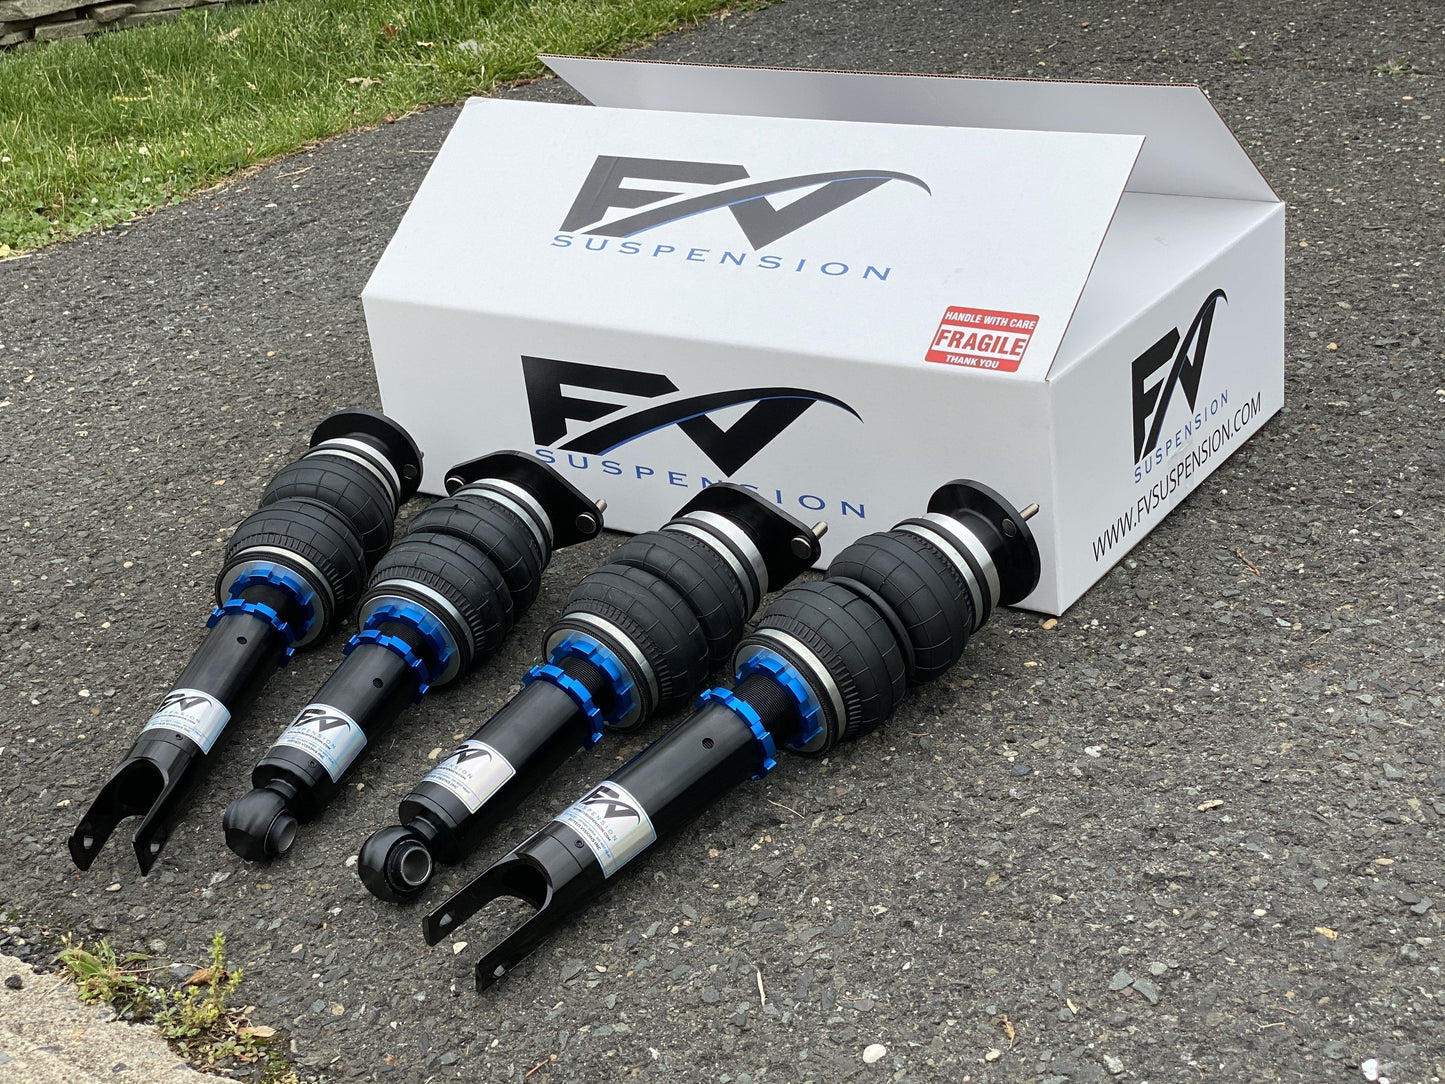 FV Suspension 3H Tier 3 Complete Air Ride kit for 11-14 Cadillac CTS Coupe - FVALtier3kit155